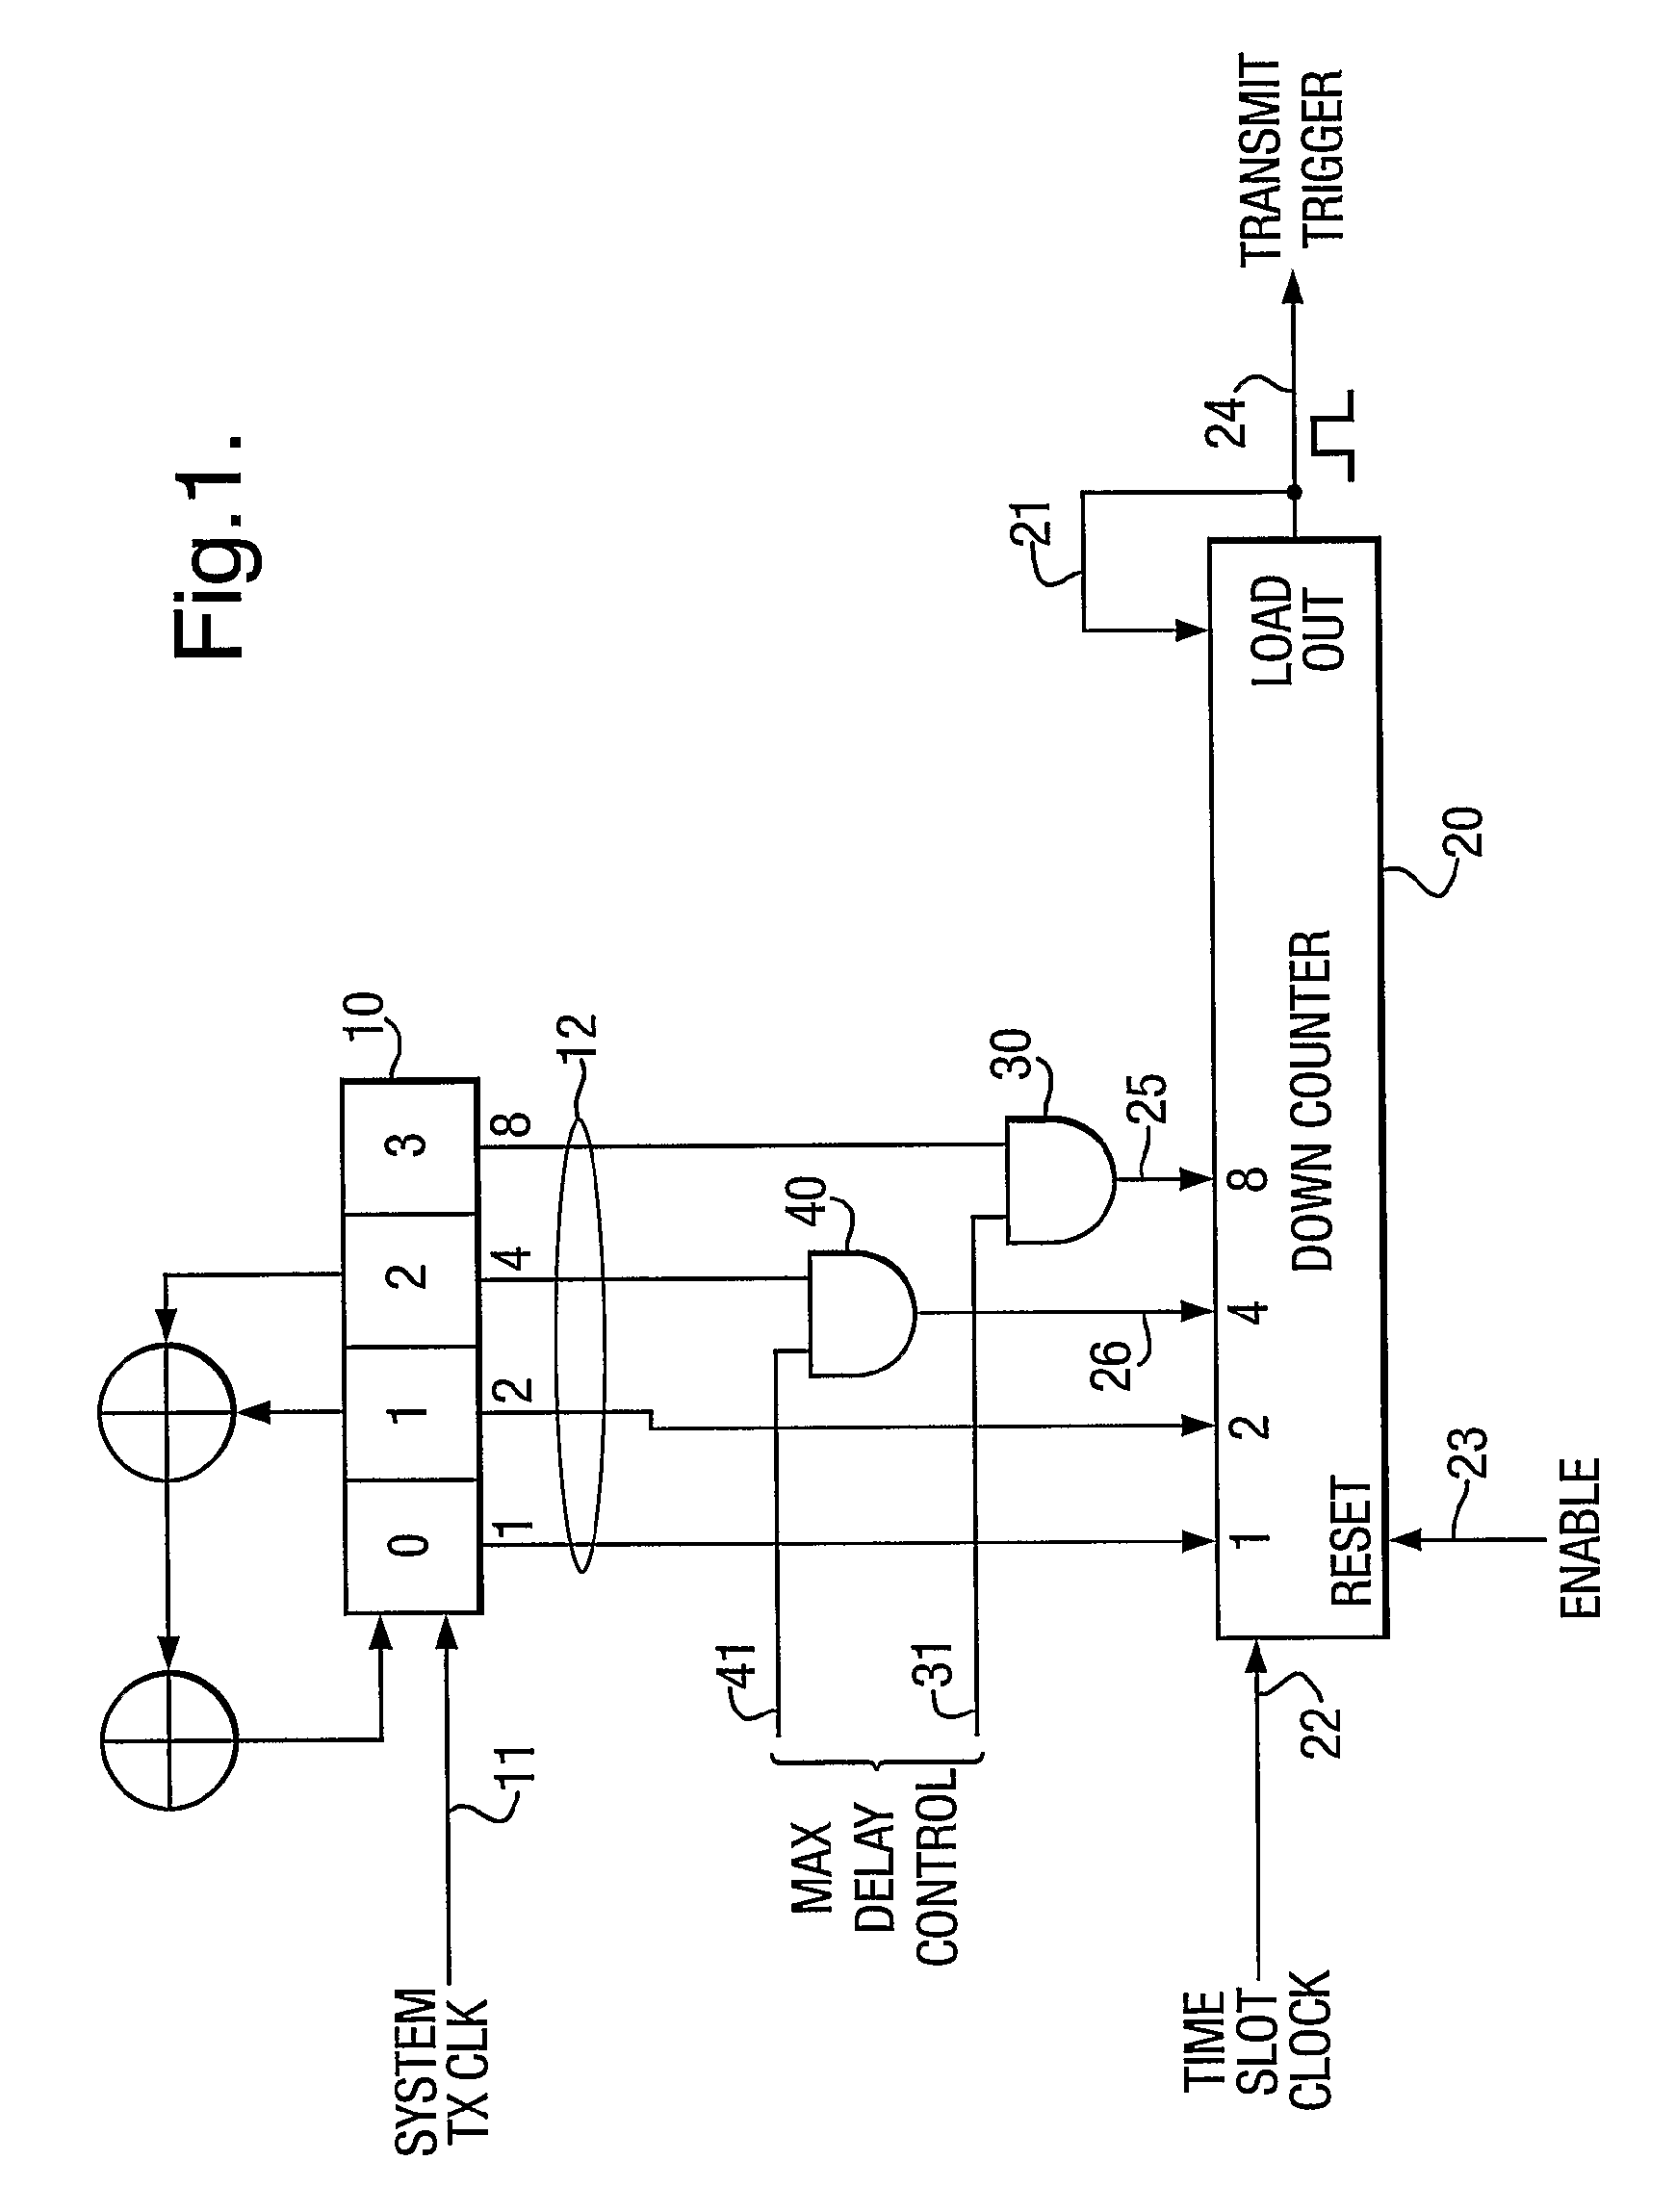 Method and System for Controlling RFID Transponder Response Waiting Periods